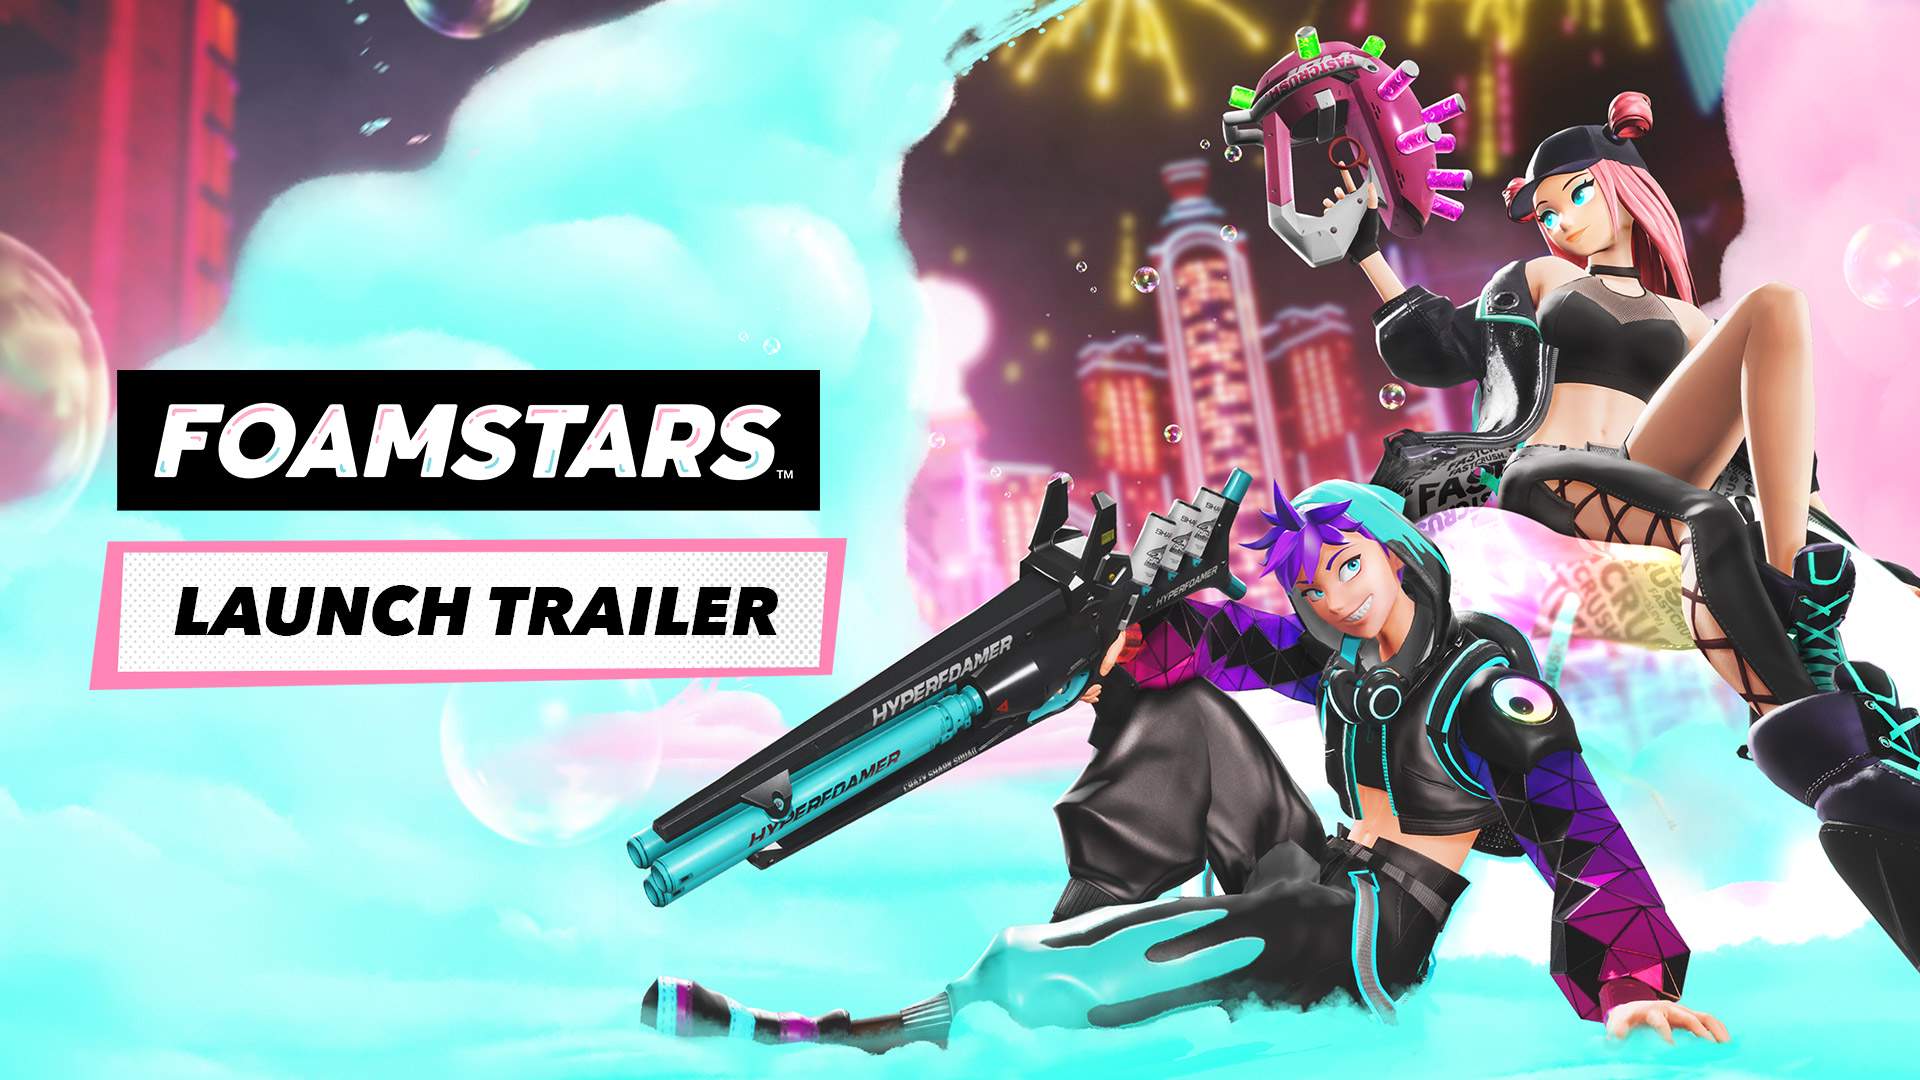 FOAMSTARS ΔGITO and Soa are sat holding their foam guns surrounded by piles of blue and pink foam